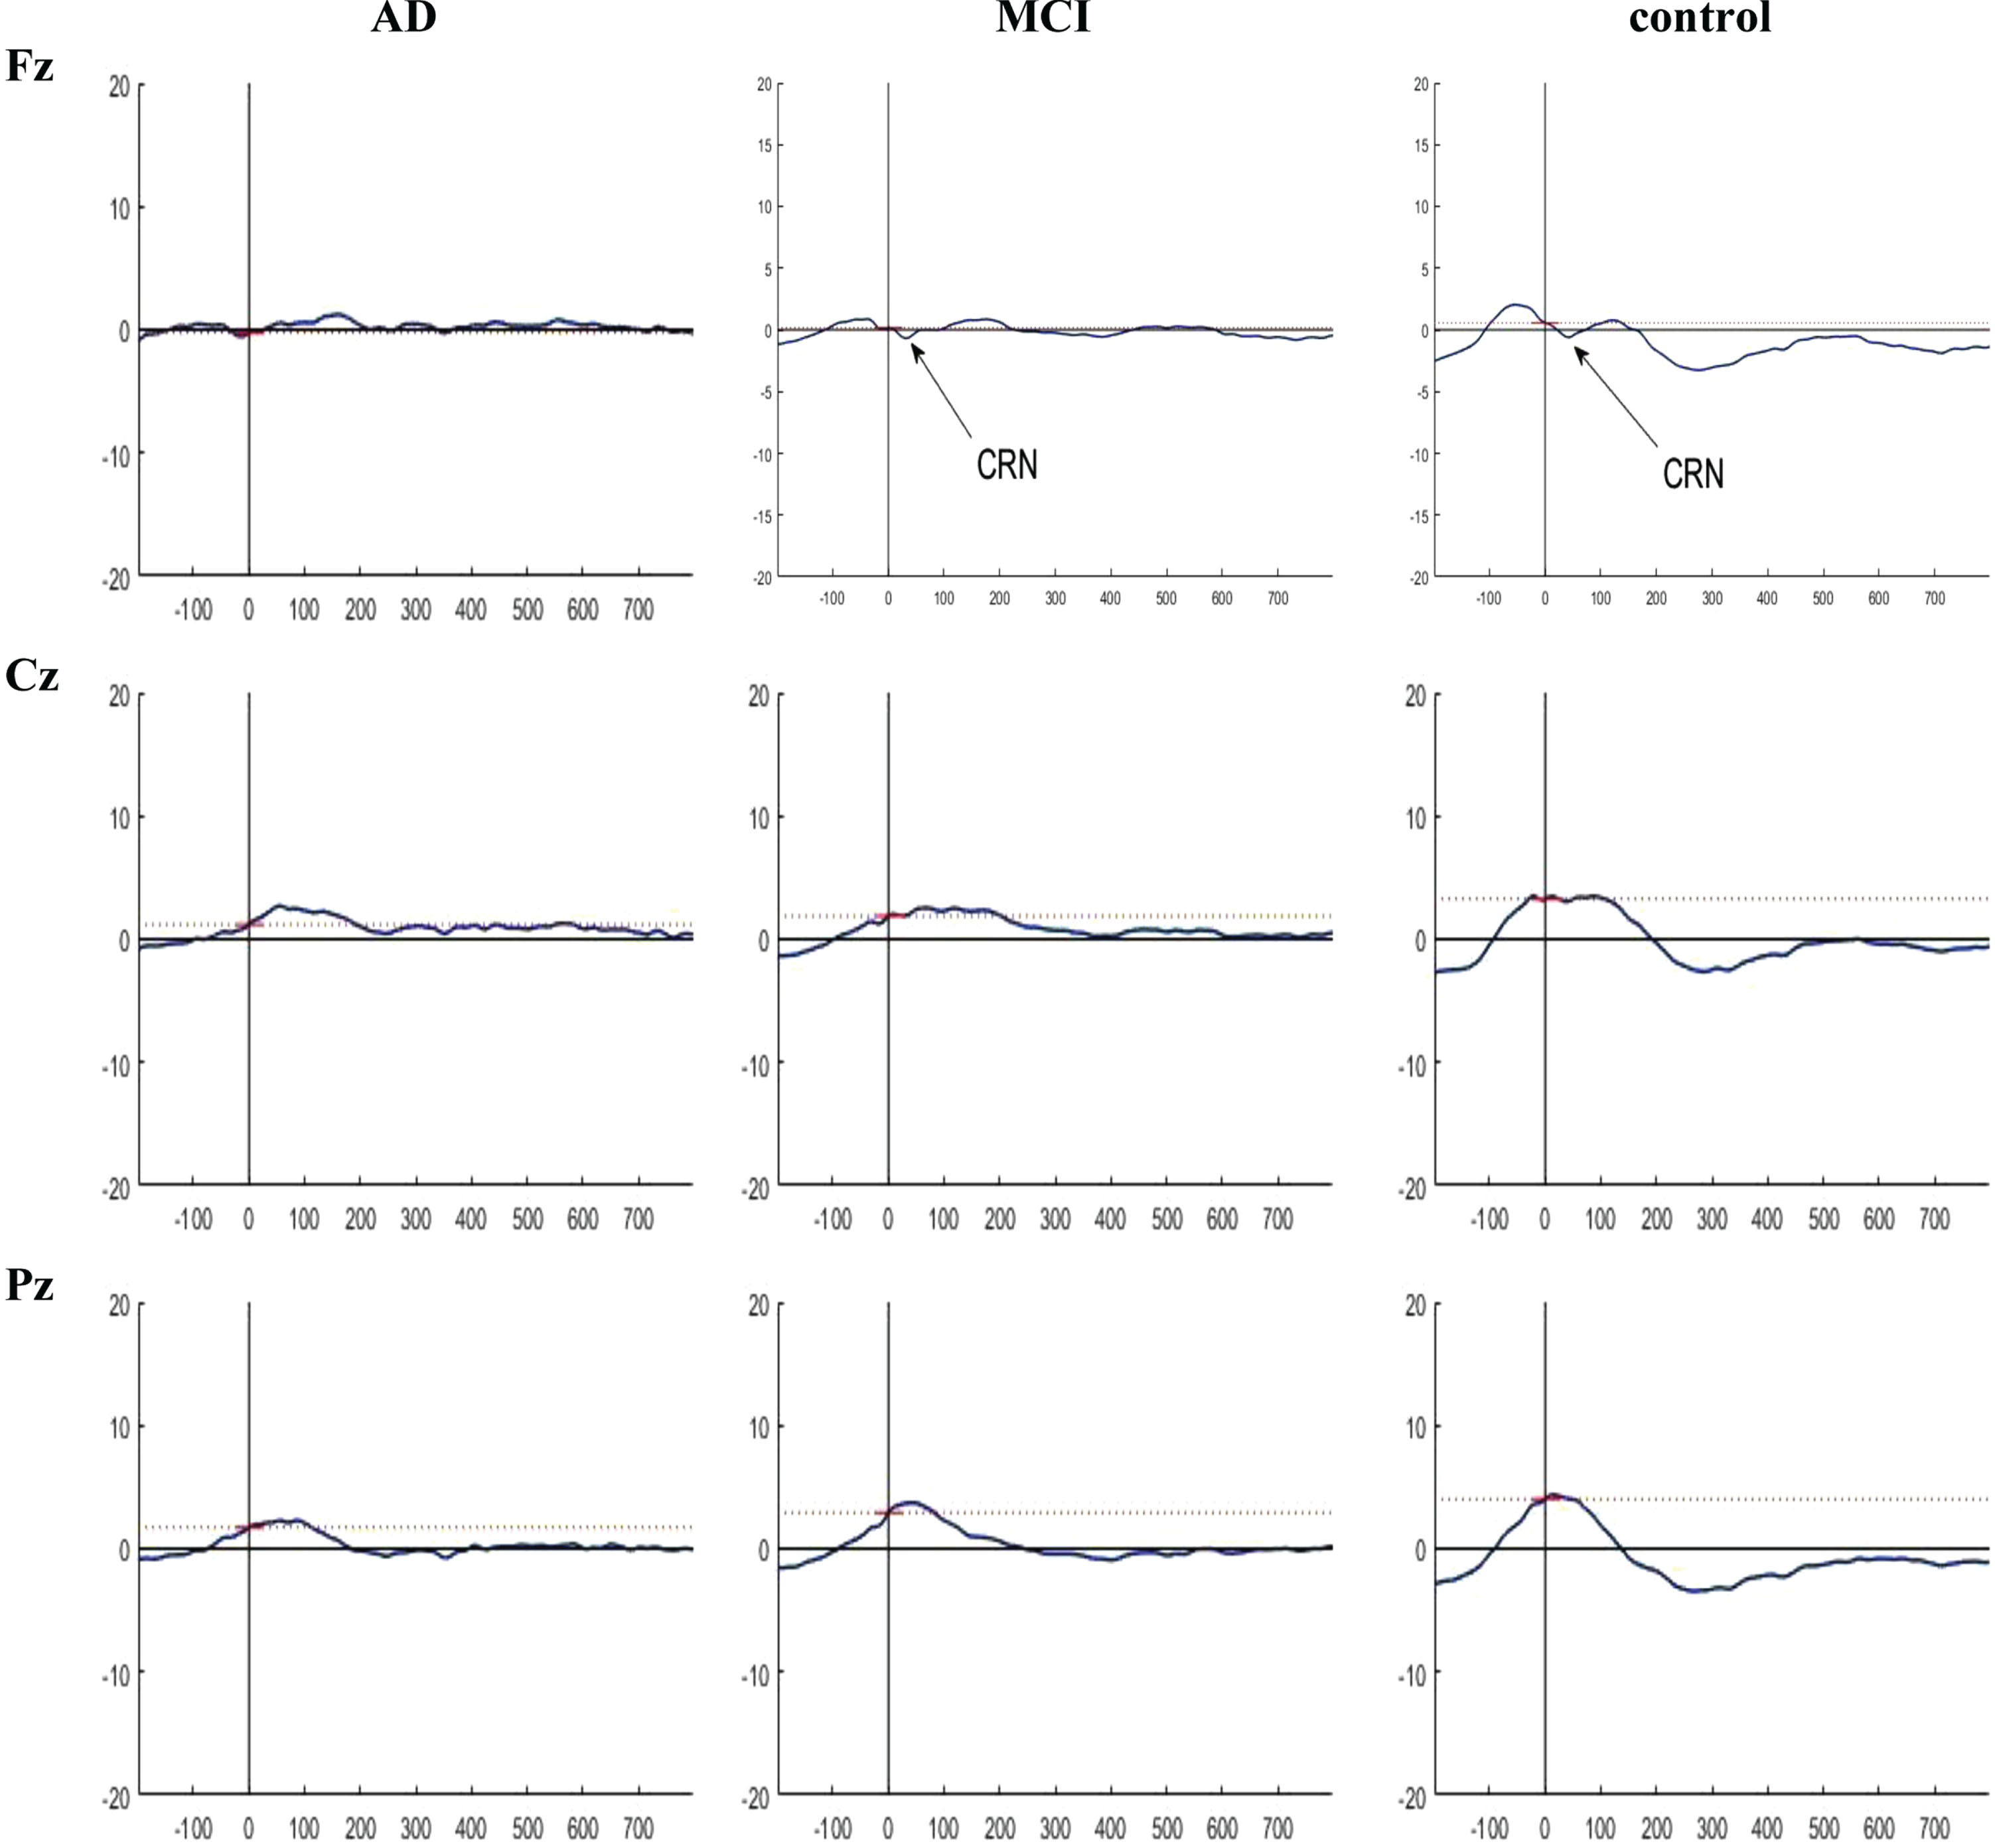 Grand averaged plots of ERPs time-locked to correct response obtained from 16 AD patients, 16 MCI patients, and 15 controls in Fz, Cz, and Pz channels. The peaks of CRN were visible in MCI and control groups in Fz and Cz channels but there is no difference in the CRN component between the groups in these channels.